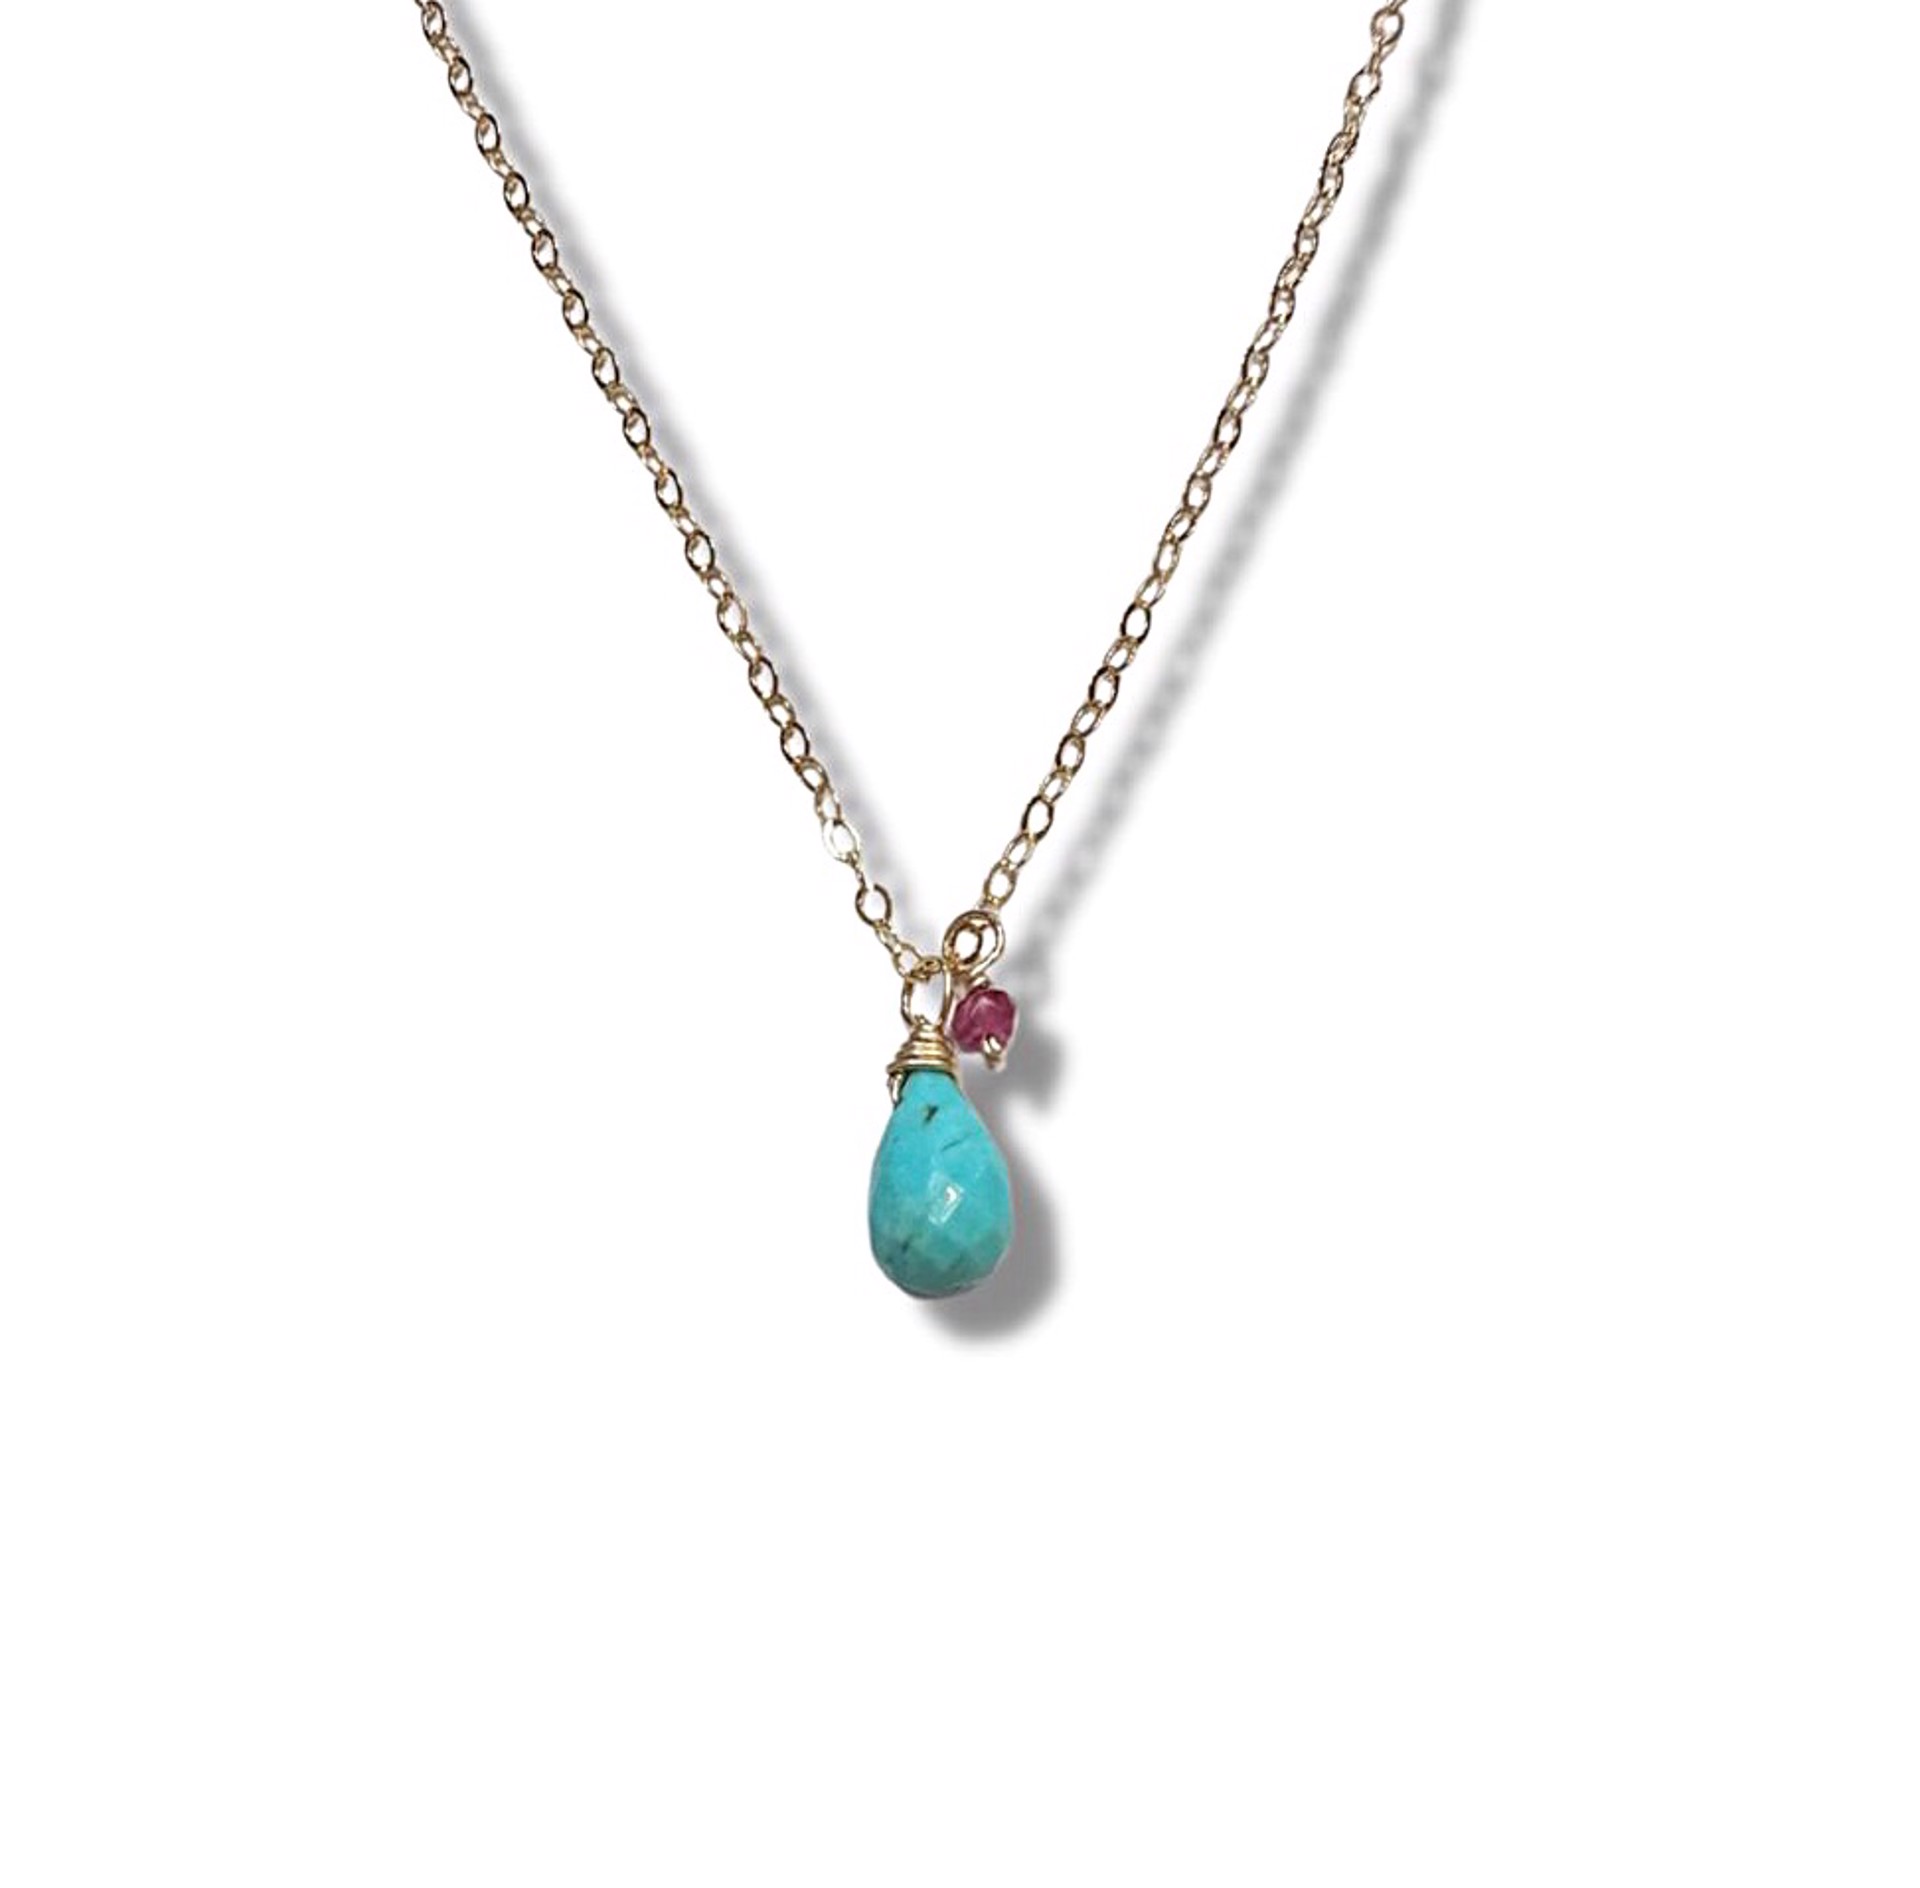 Necklace - 14K Gold Filled Ruby and Sleeping Beauty Turquoise Drop by Julia Balestracci